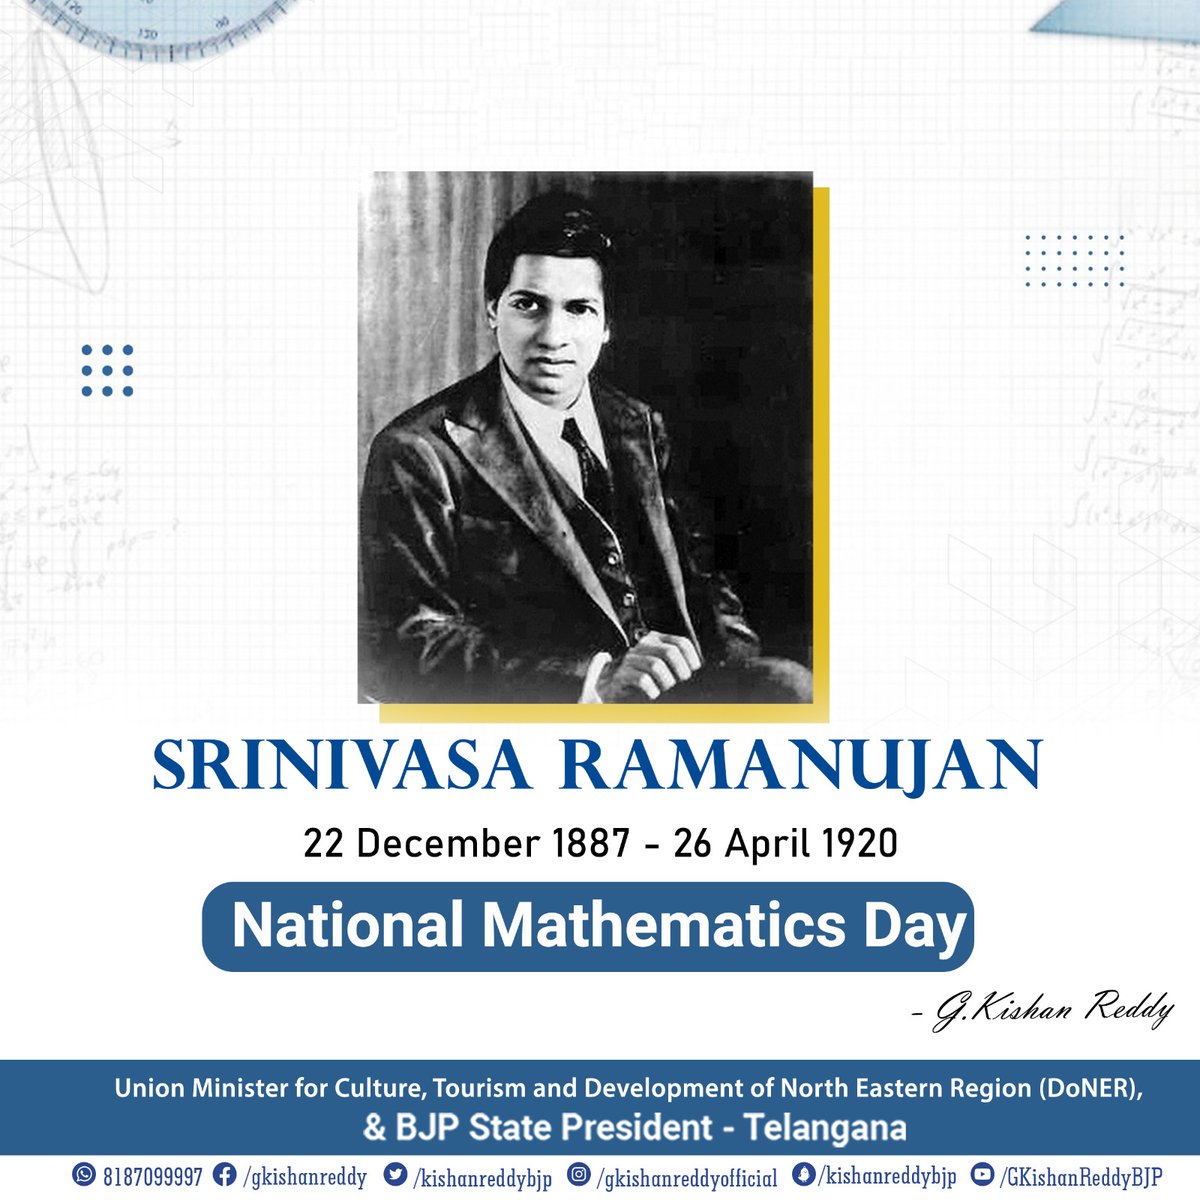 Homage to ‘the man who knew infinity’, the mathematical genius, Late Shri Srinivasa Ramanujan Ji, on the occasion of his Jayanti. His path breaking contributions in the field of mathematics has been immense and will always be remembered. #NationalMathematicsDay